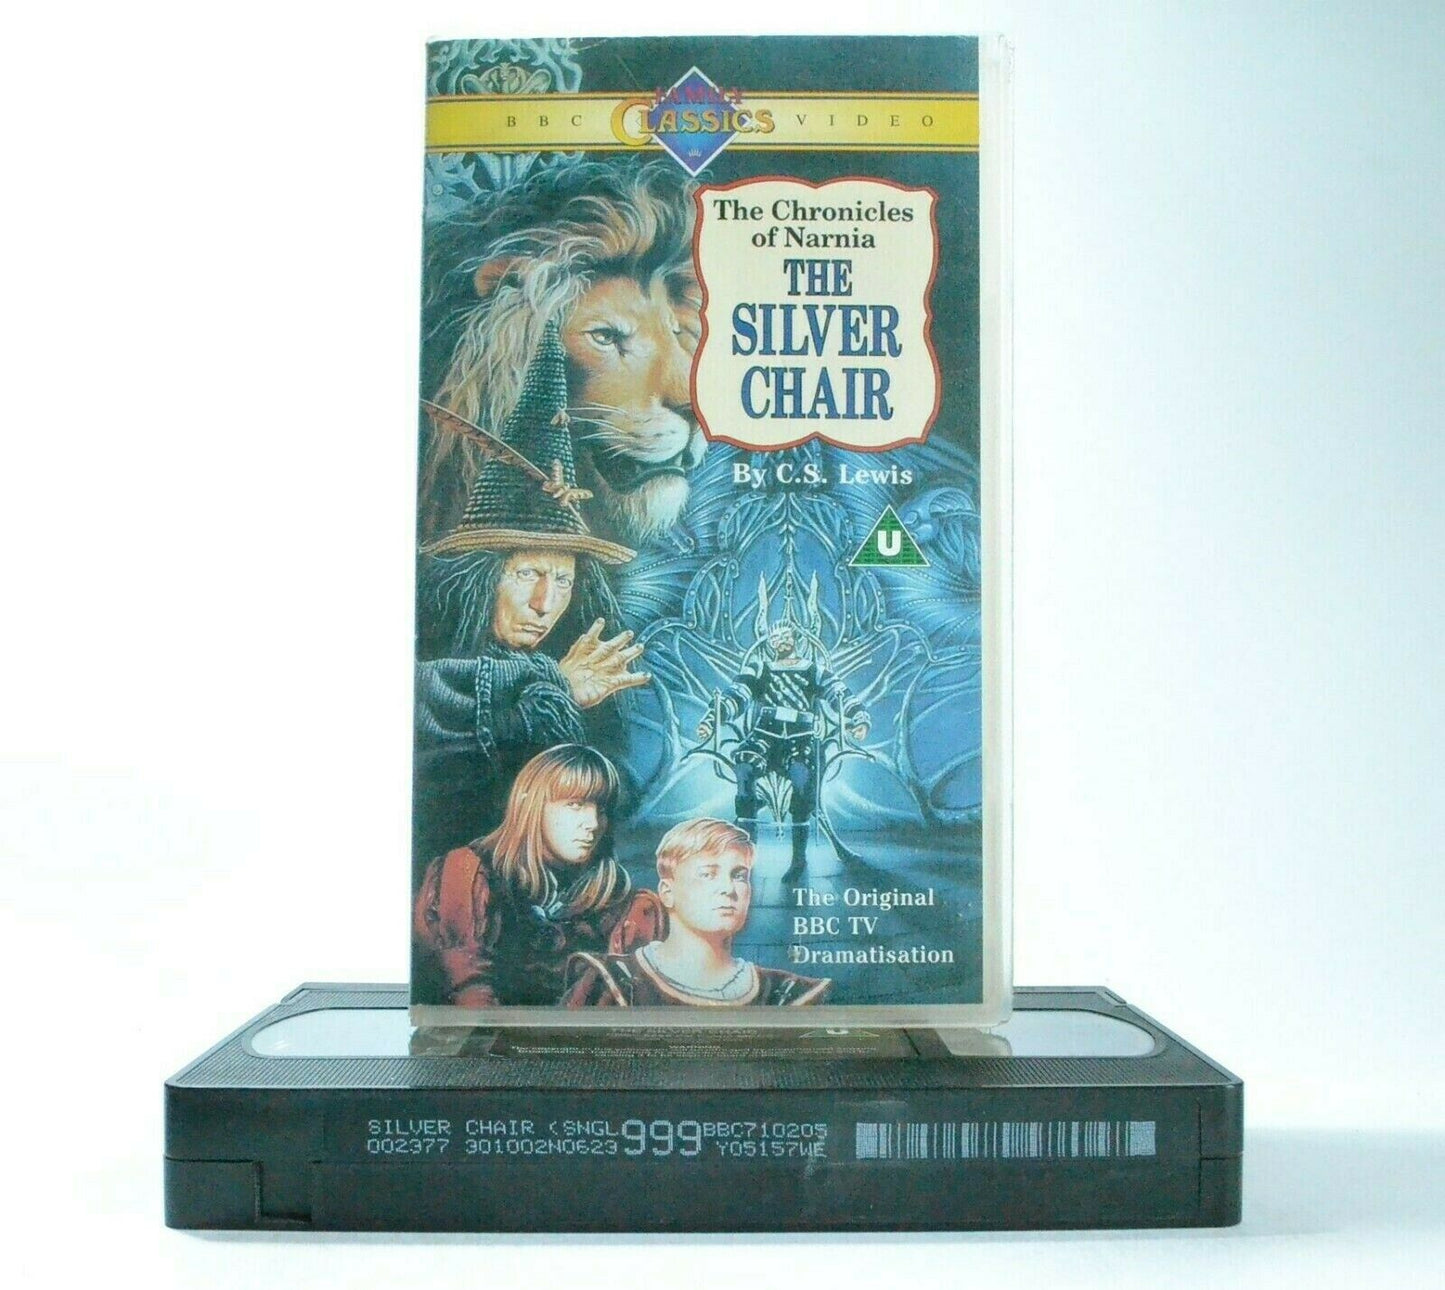 The Chronicles Of Narnia: The Silver Chair - By C.S.Lewis - Fantasy - Kids - VHS-